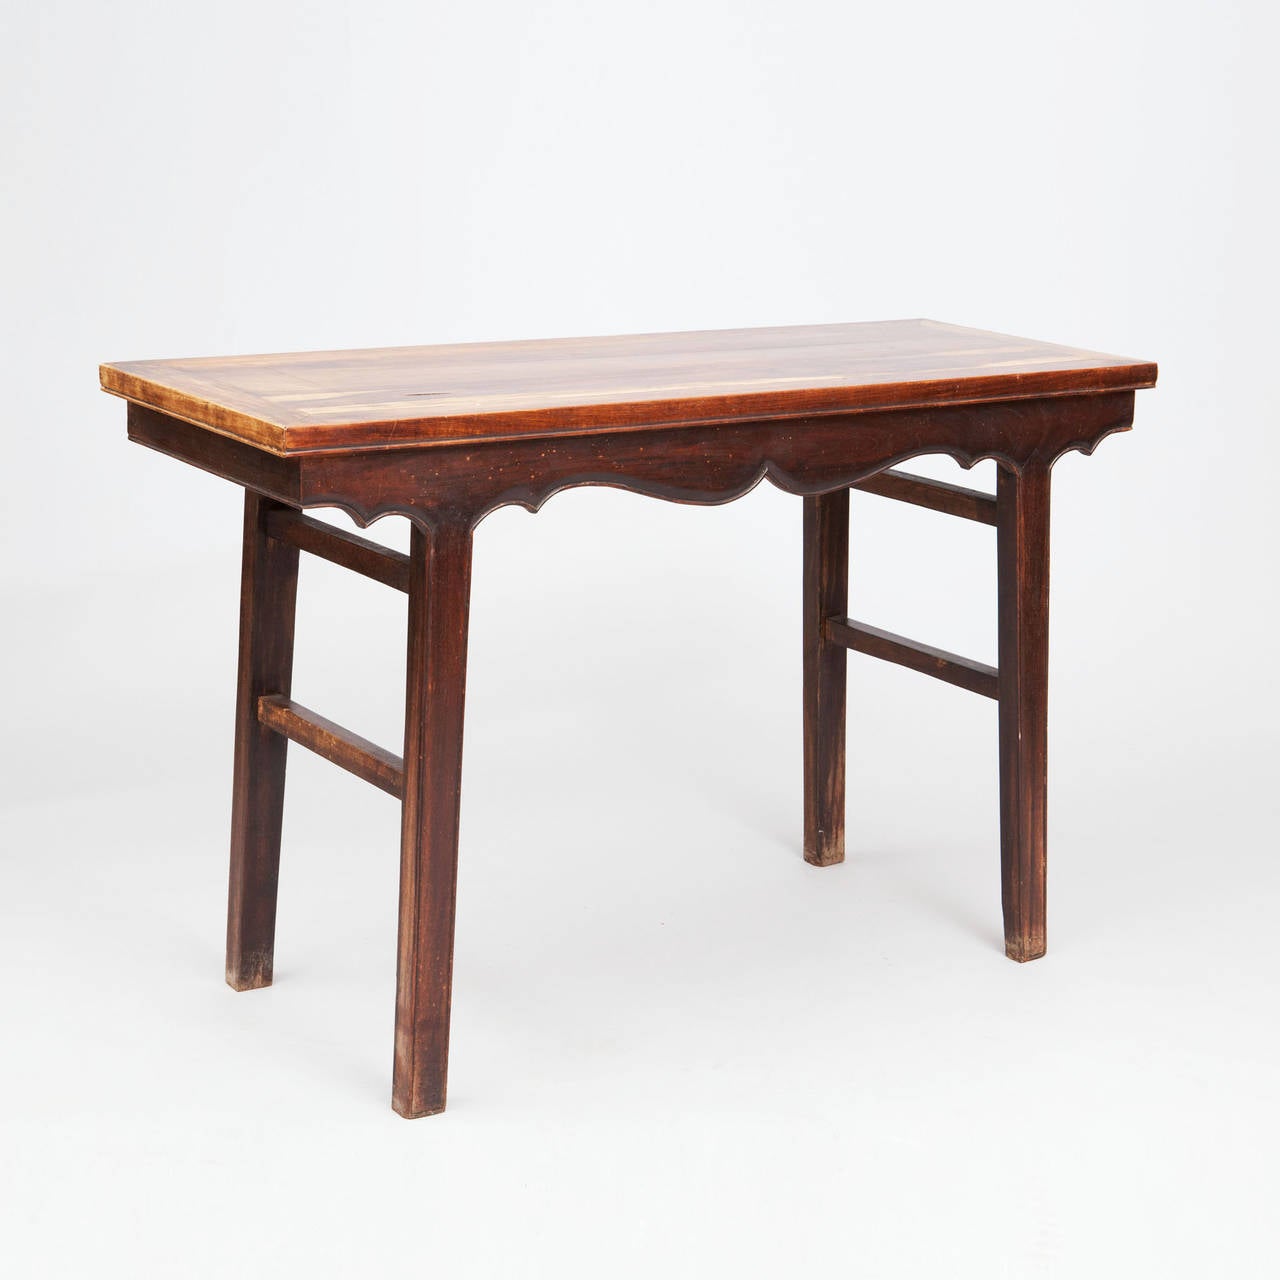 A fine 19th century Chinese hardwood altar table, the rectangular top with scalloped shell apron on both sides, raised on square canted legs and stretchers.